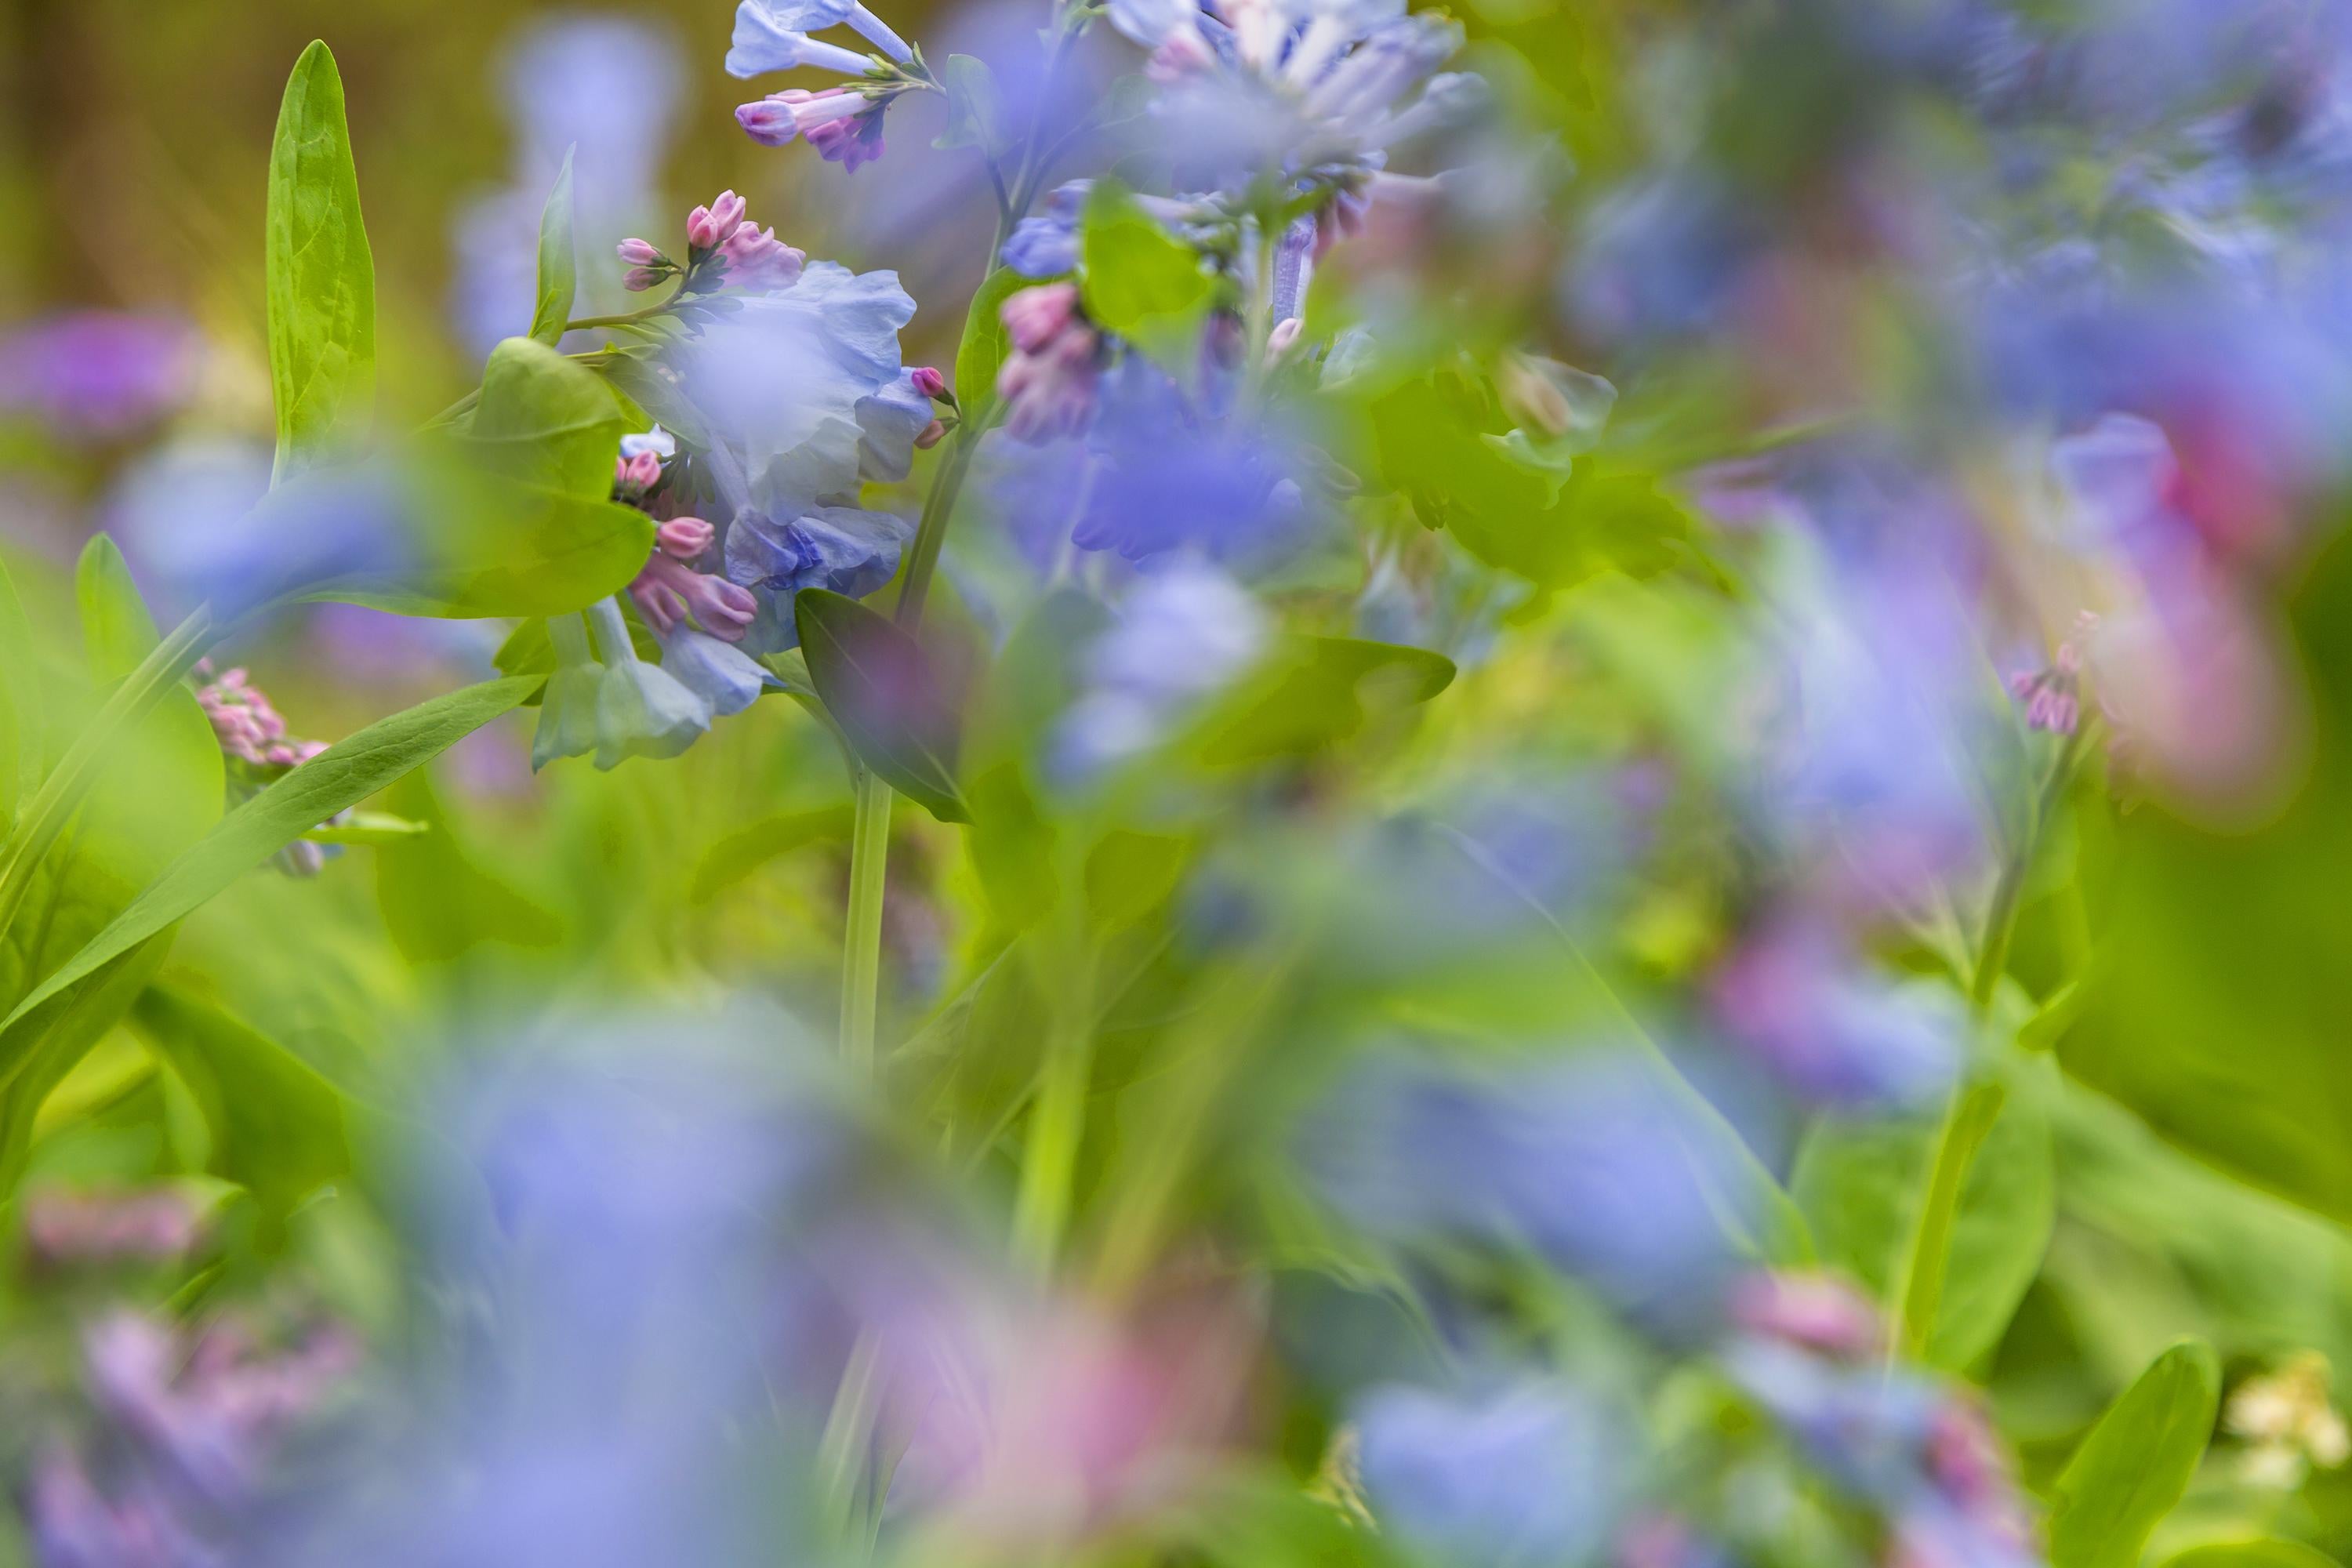 Thad Lee Abstract Photograph - 'Bluebells of the Second Spring' - abstract landscape photography - floral